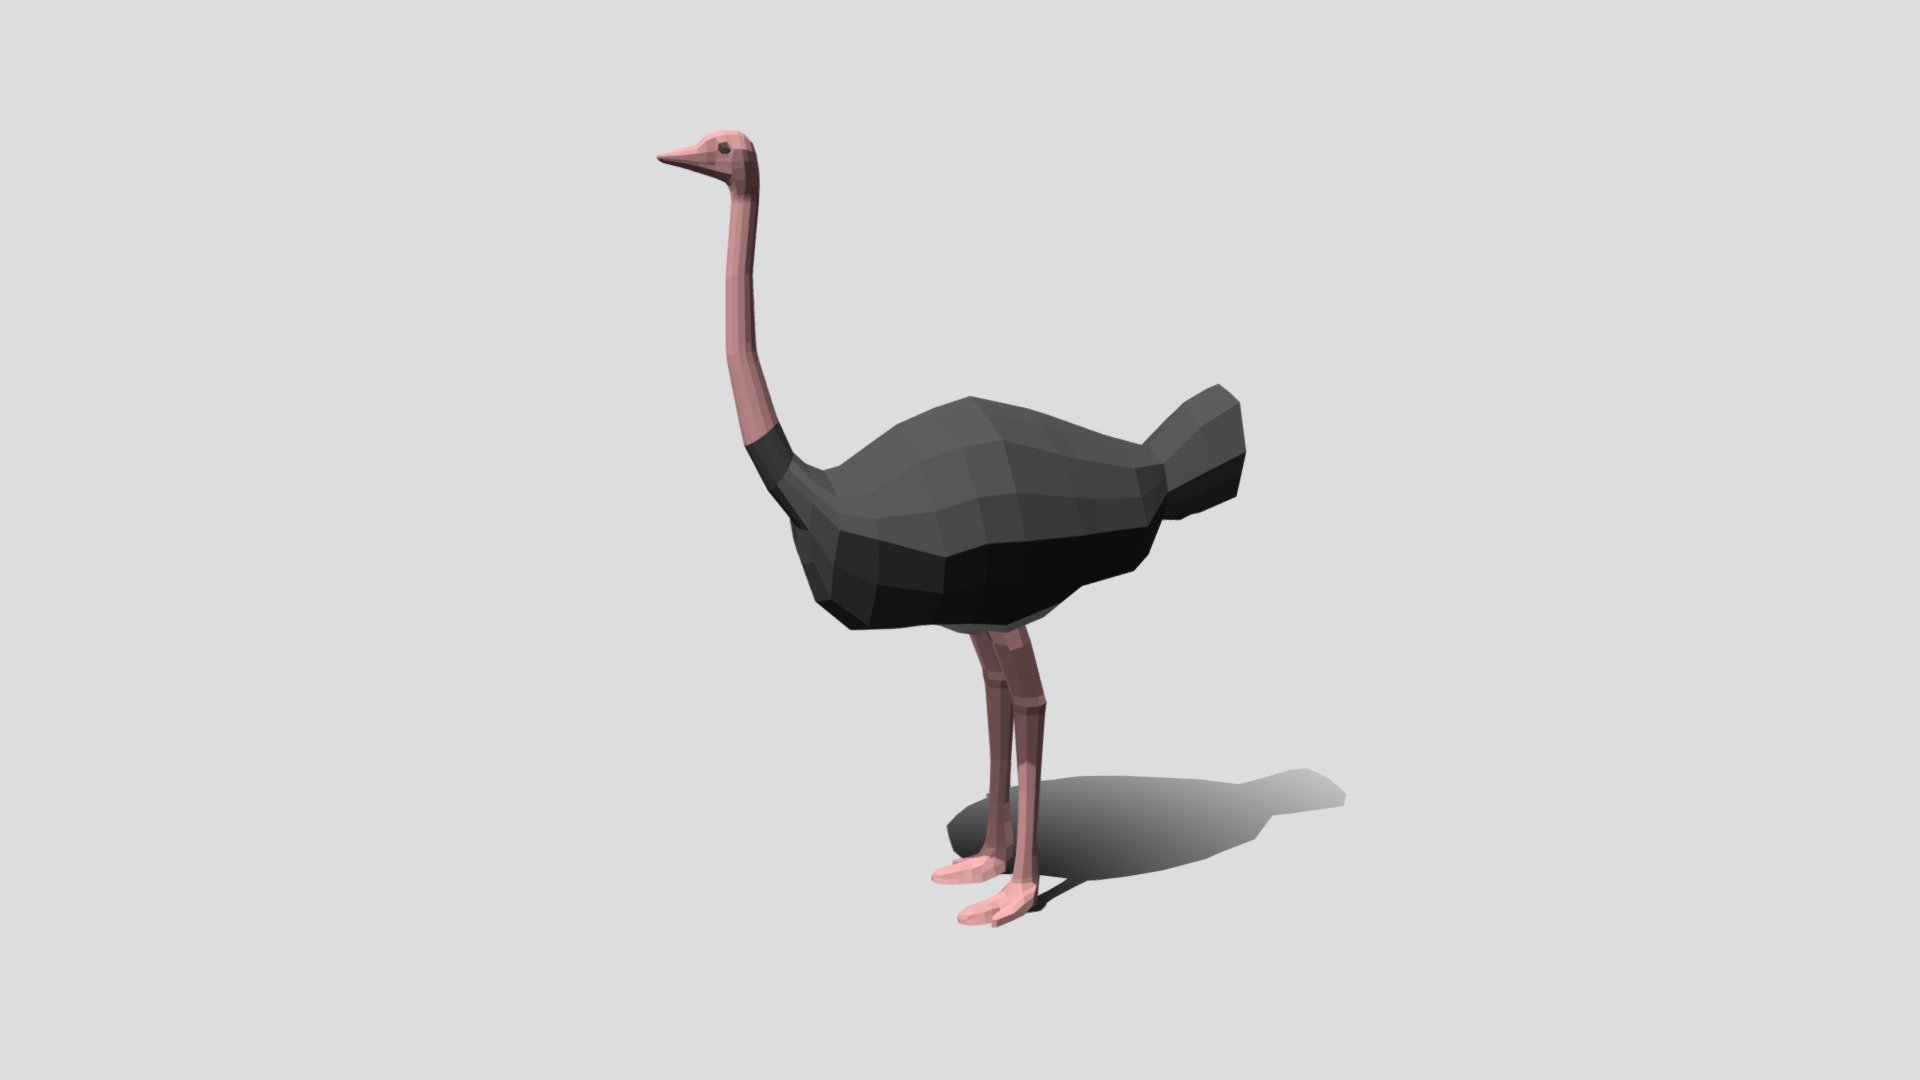 This is a low poly 3D model of an Ostrich. The low poly Ostrich was modeled and prepared for low-poly style renderings, background, general CG visualization presented as a mesh with quads only.

Verts : 966 Faces: 964

The 3D model have simple materials with diffuse colors.

No ring, maps and no UVW mapping is available.

The original file was created in blender. You will receive a 3DS, OBJ, FBX, blend, DAE, Stl.

All preview images were rendered with Blender Cycles. Product is ready to render out-of-the-box. Please note that the lights, cameras, and background is only included in the .blend file. The model is clean and alone in the other provided files, centred at origin and has real-world scale 3d model